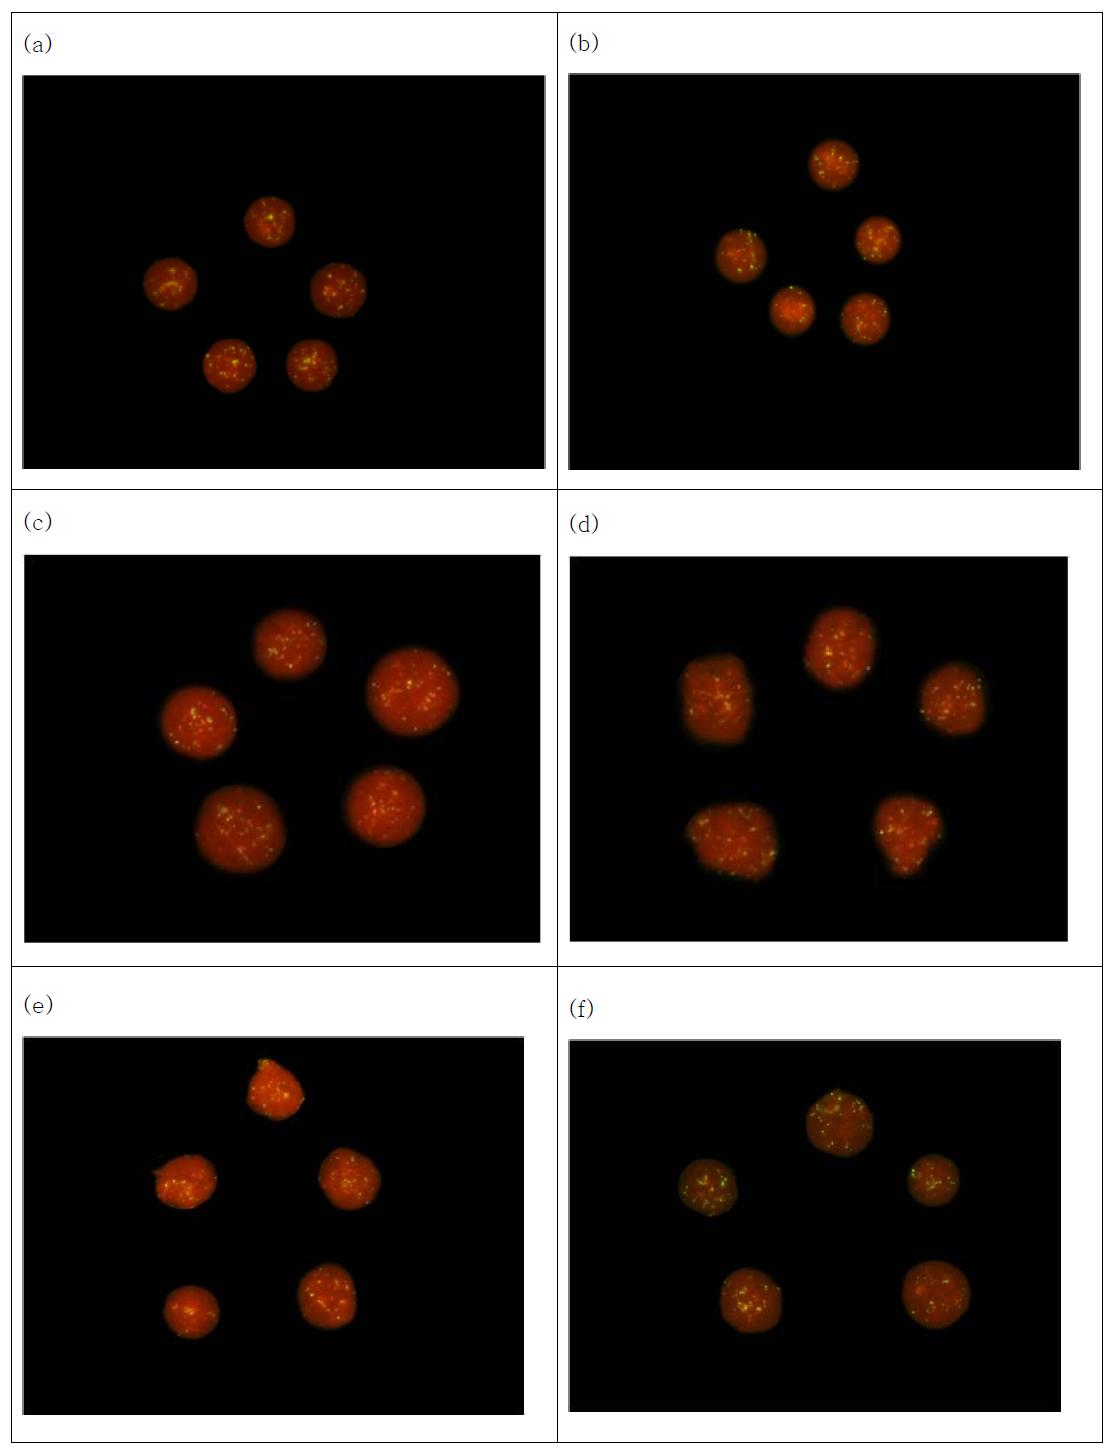 The representative telomere distribution of interphase nuclei in White Leghorn by FISH using telomeric DNA probe